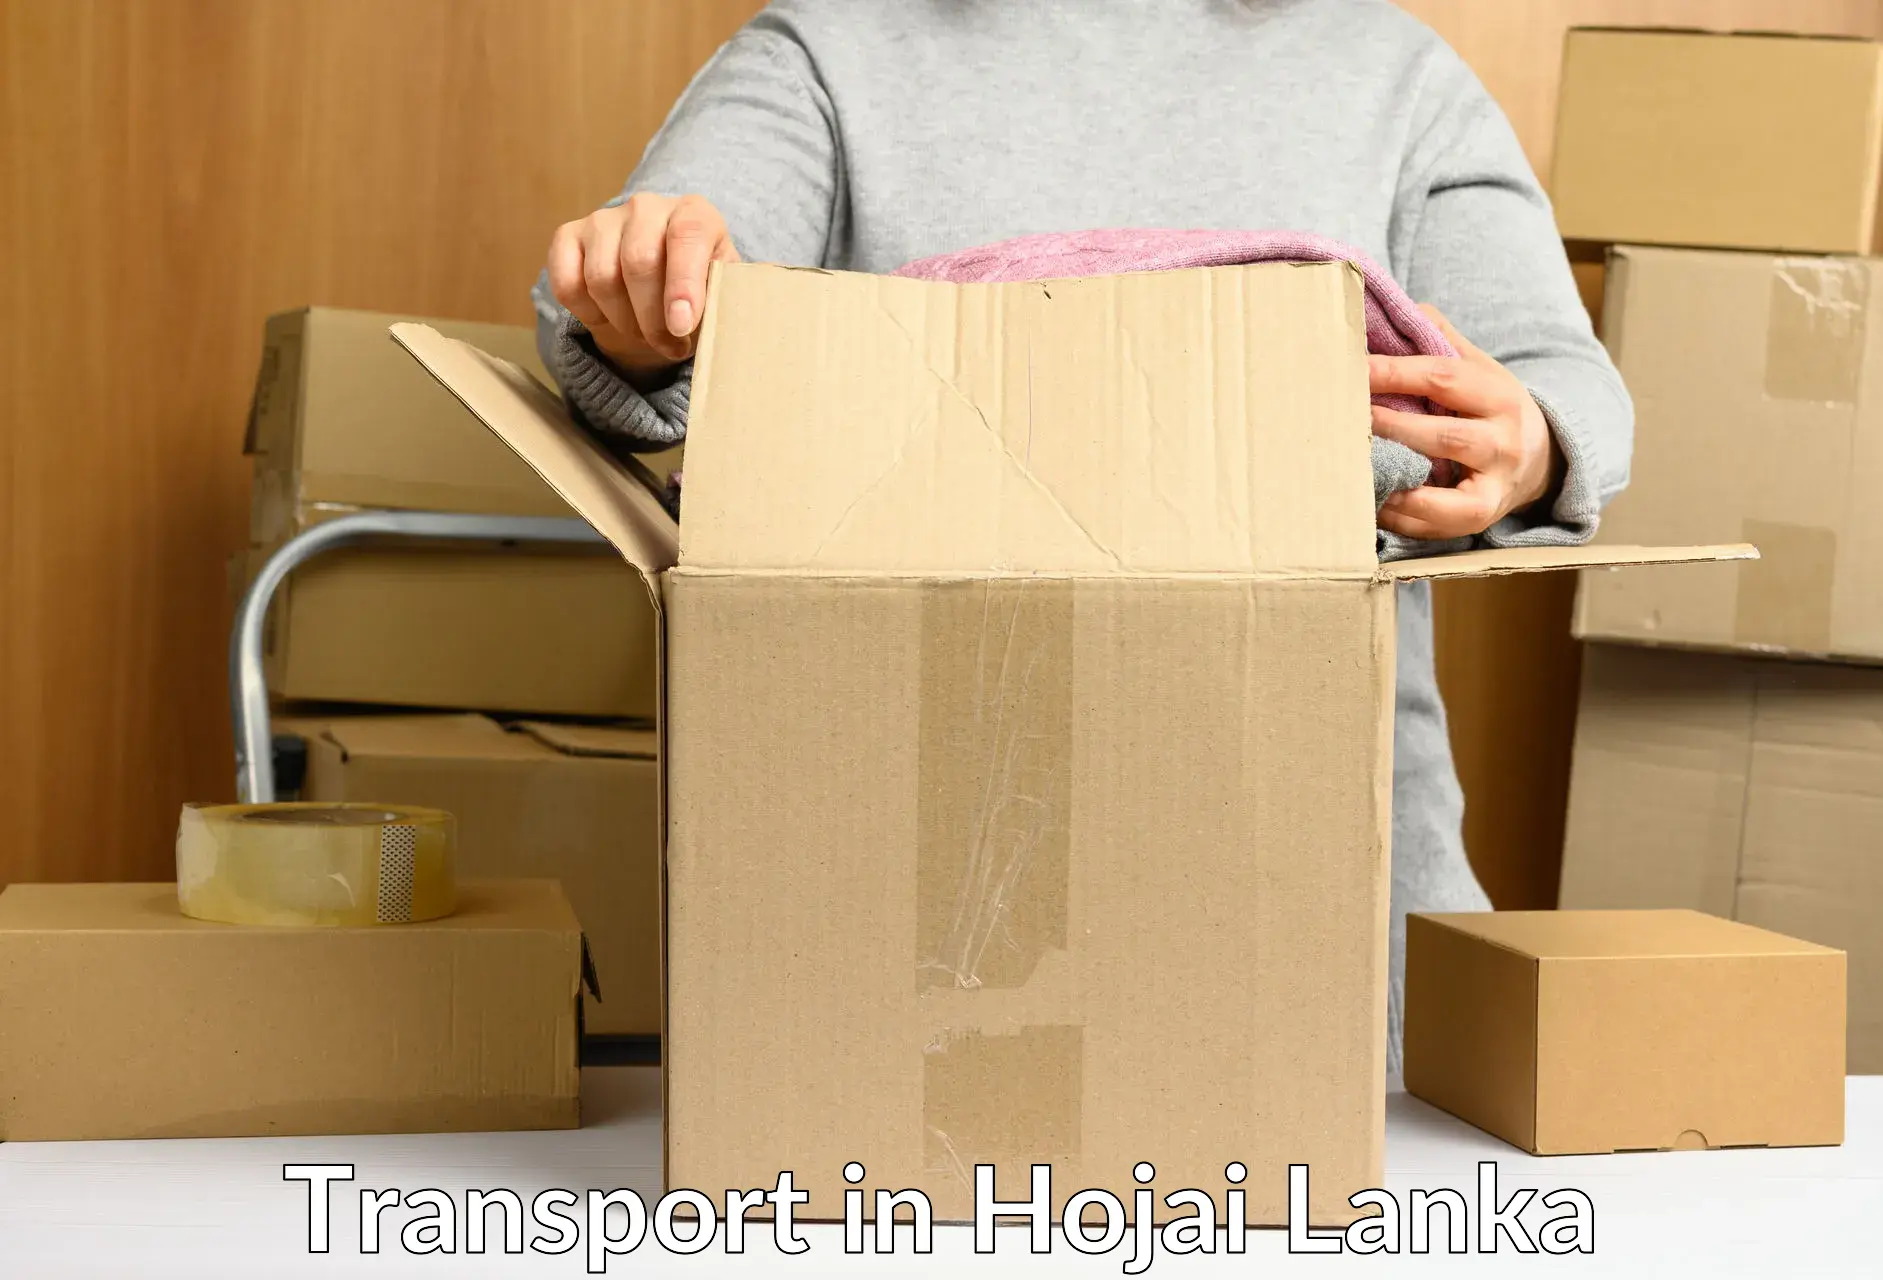 Luggage transport services in Hojai Lanka